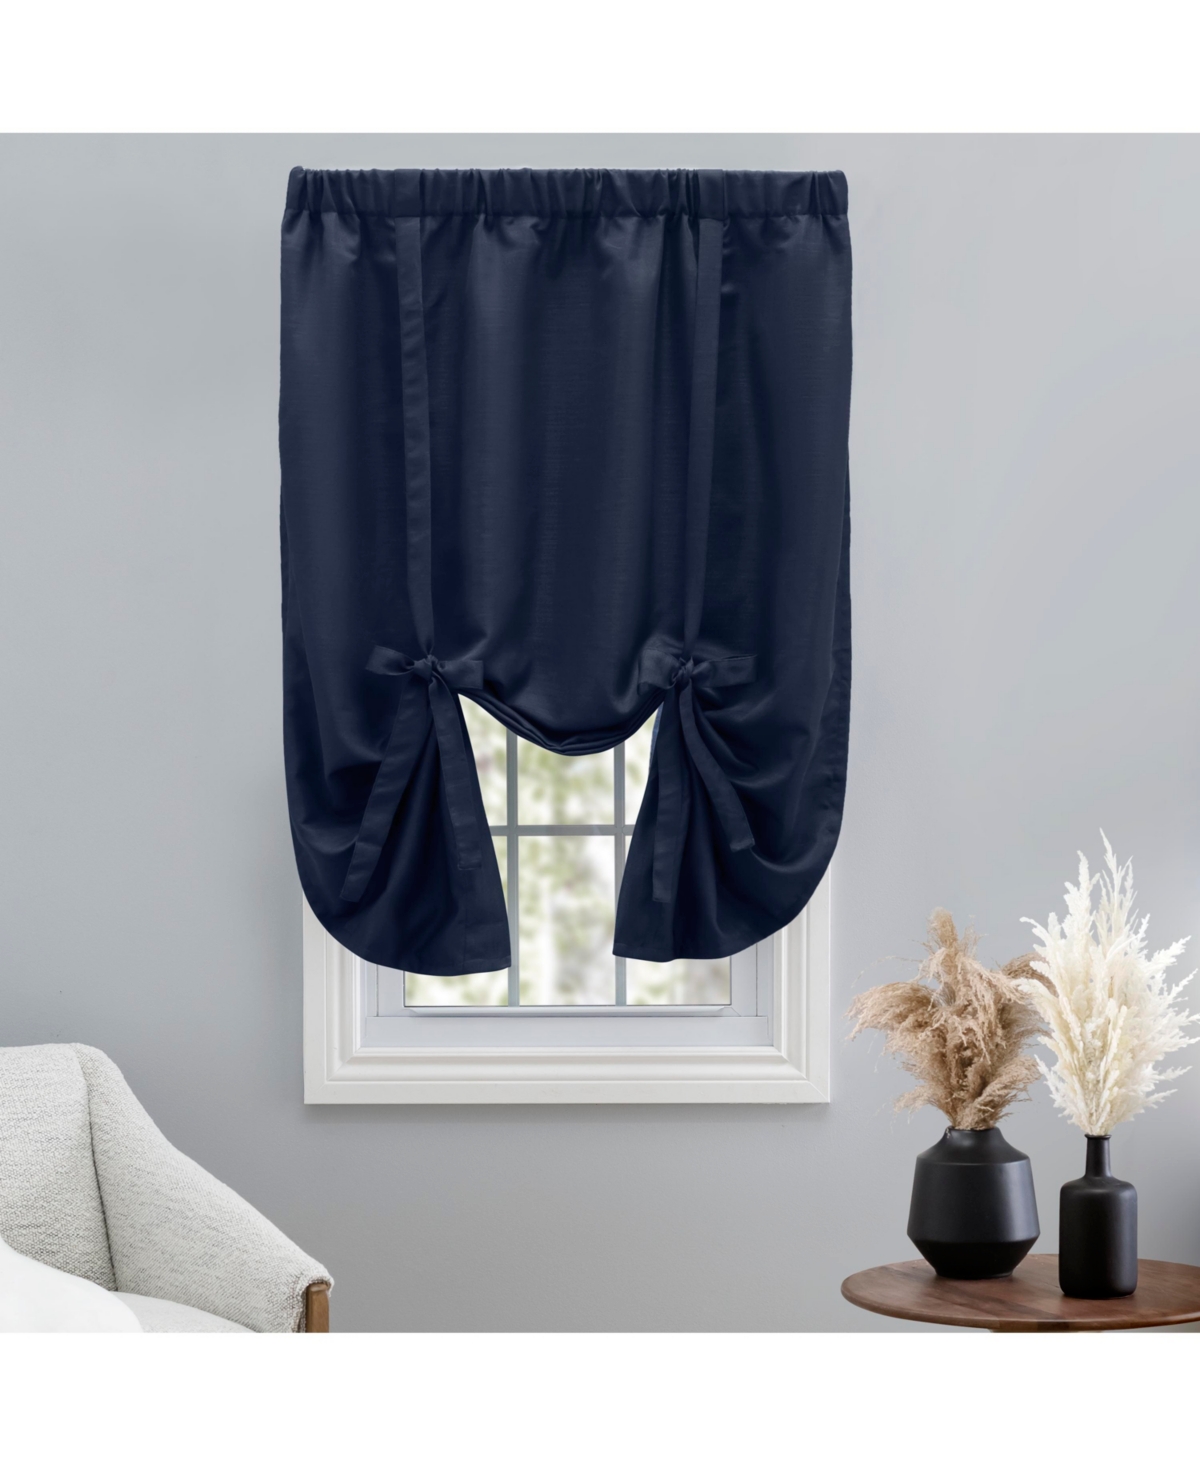 Grasscloth Lined Rod Pocket Tie-Up Curtain Panel 54"W x 63"L - Navy